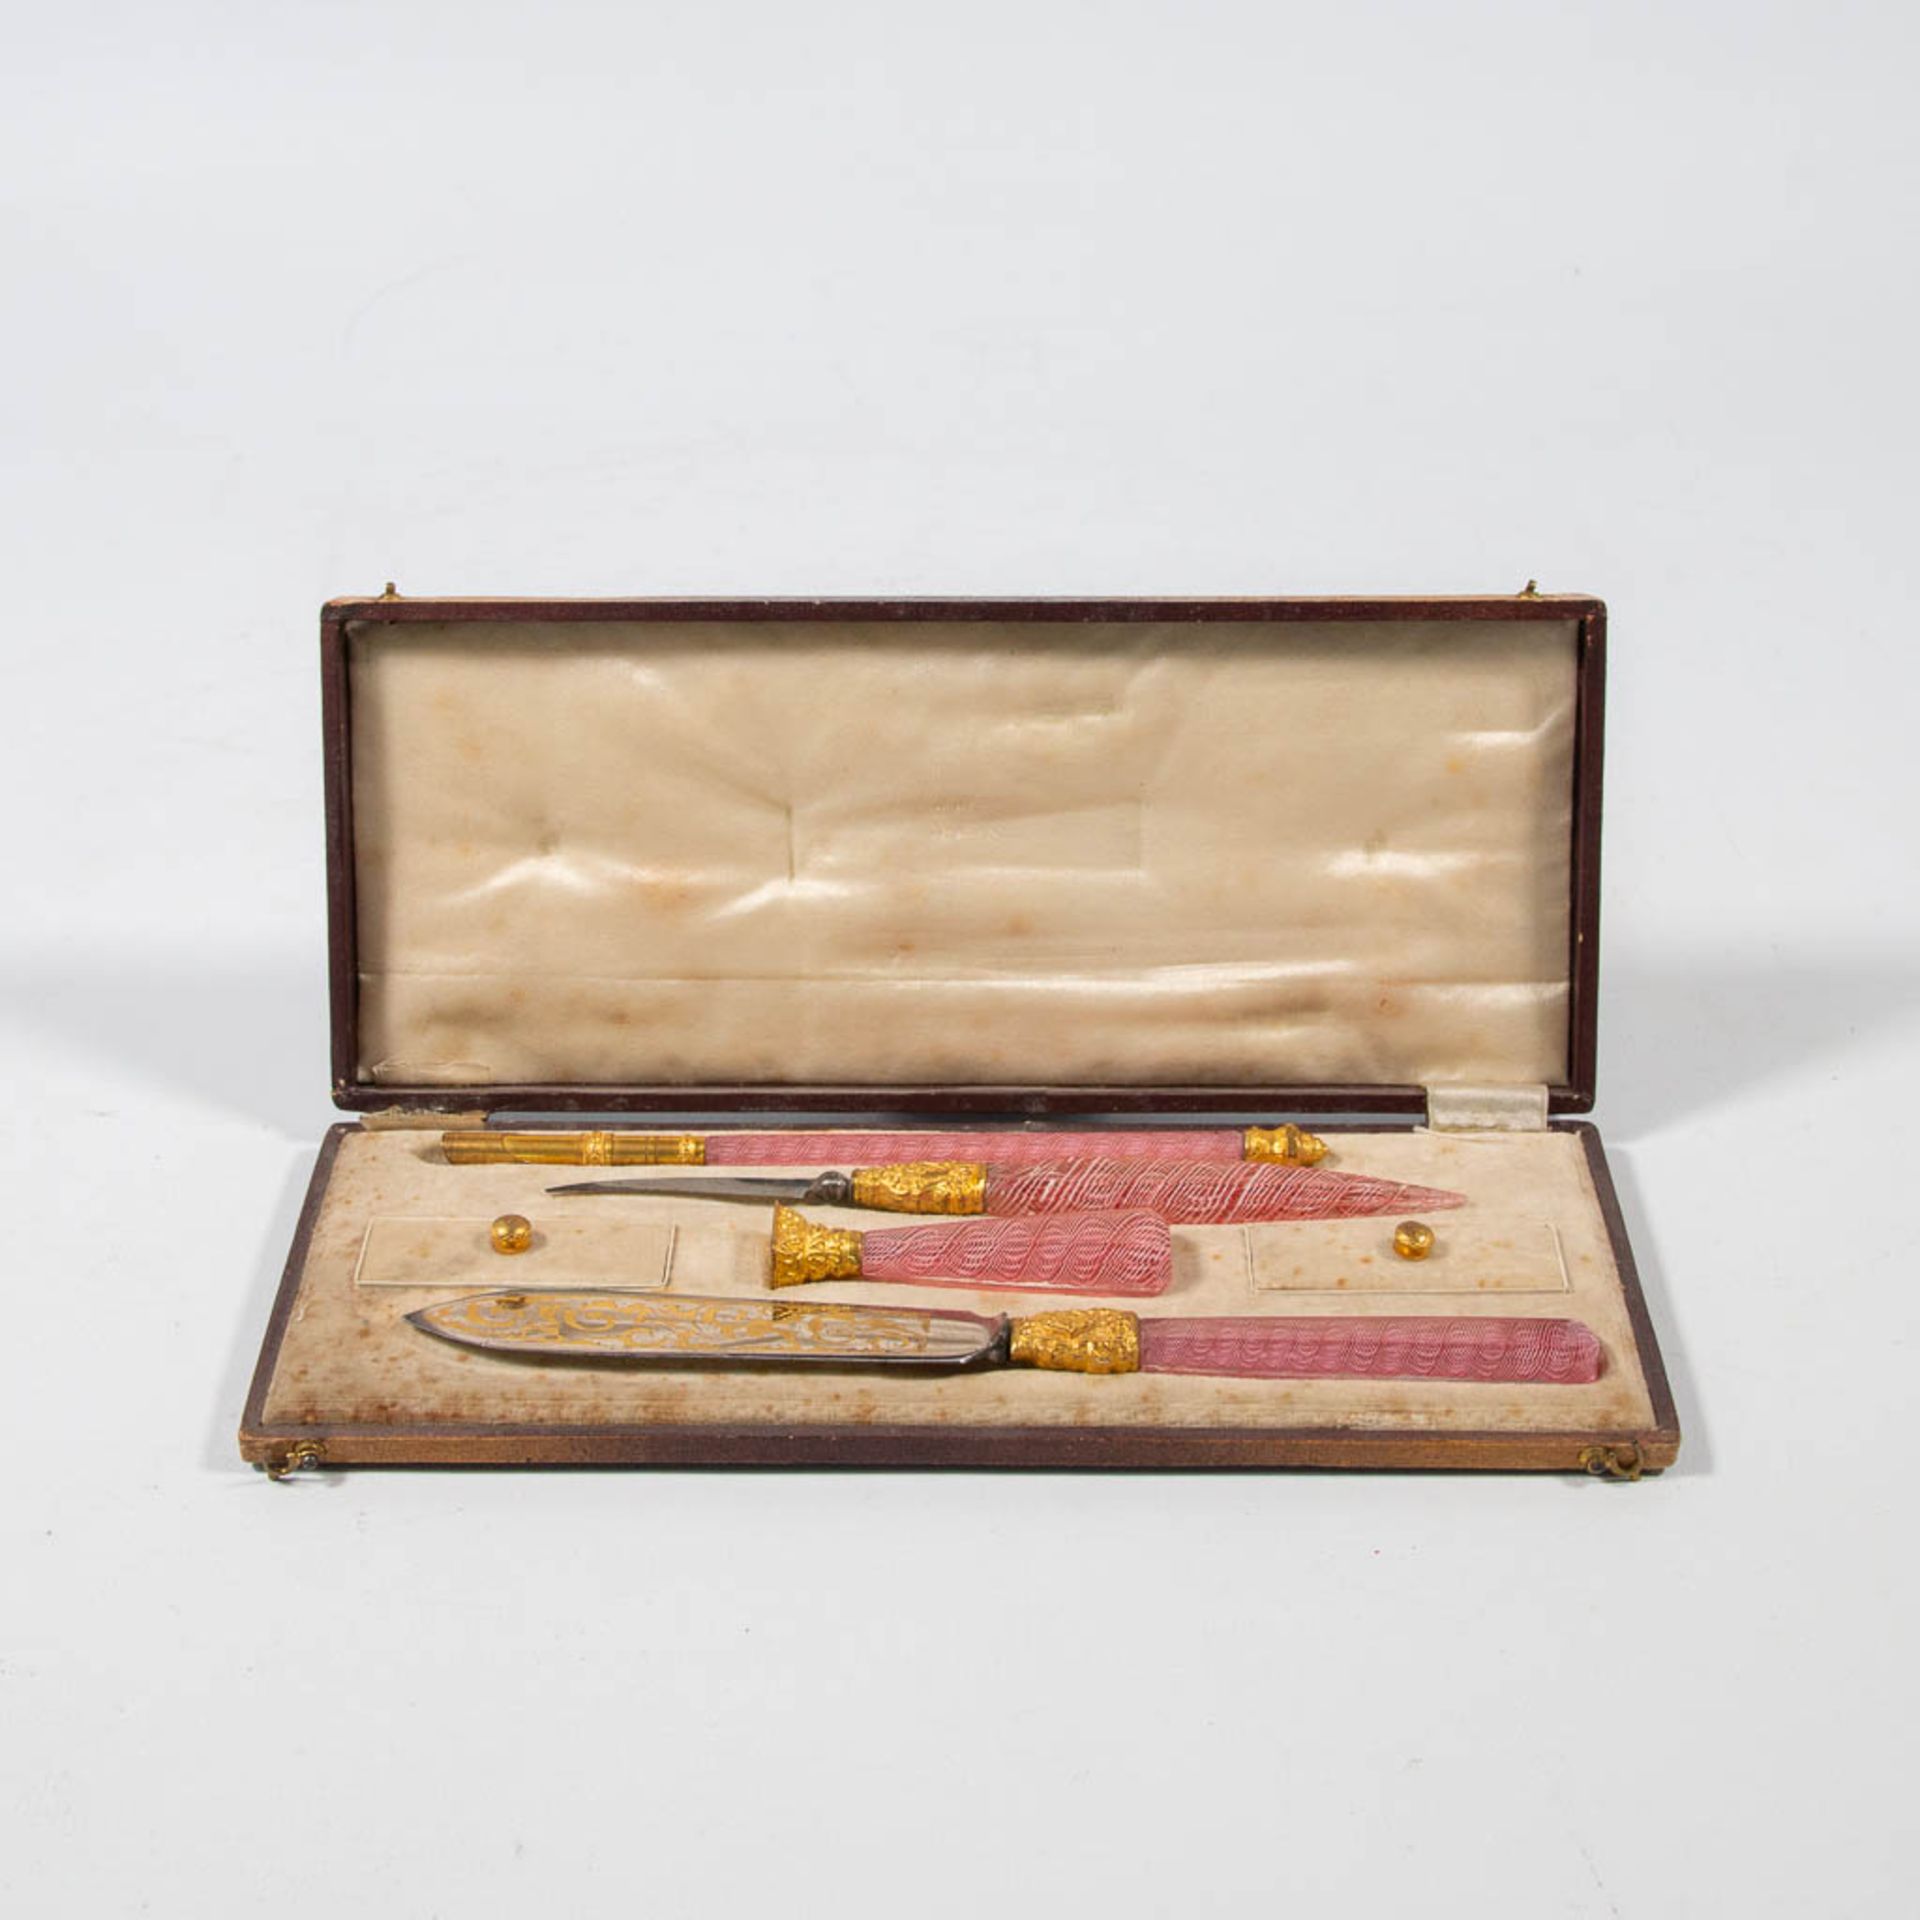 A collection of writing instruments in a case with glass handles, and made in Murano, Italy around 1